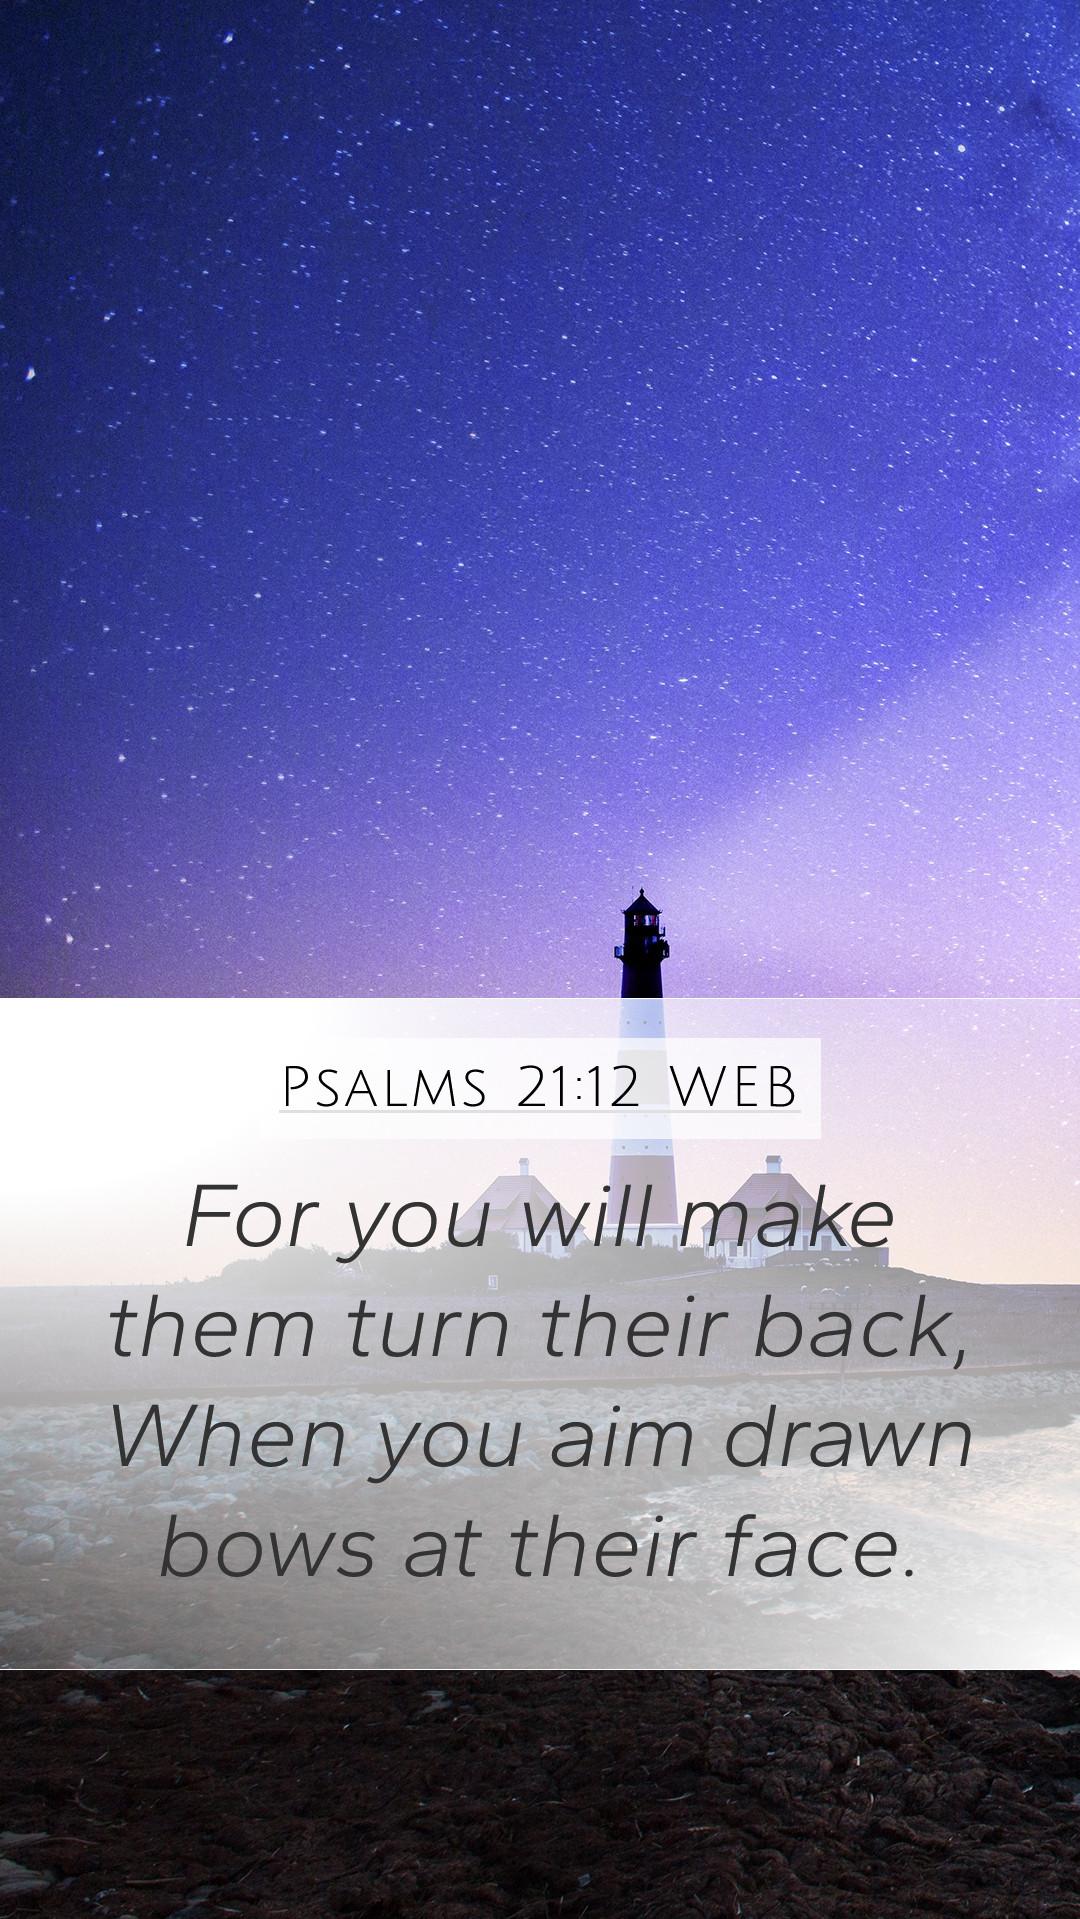 Psalms Web Mobile Phone Wallpaper For You Will Make Them